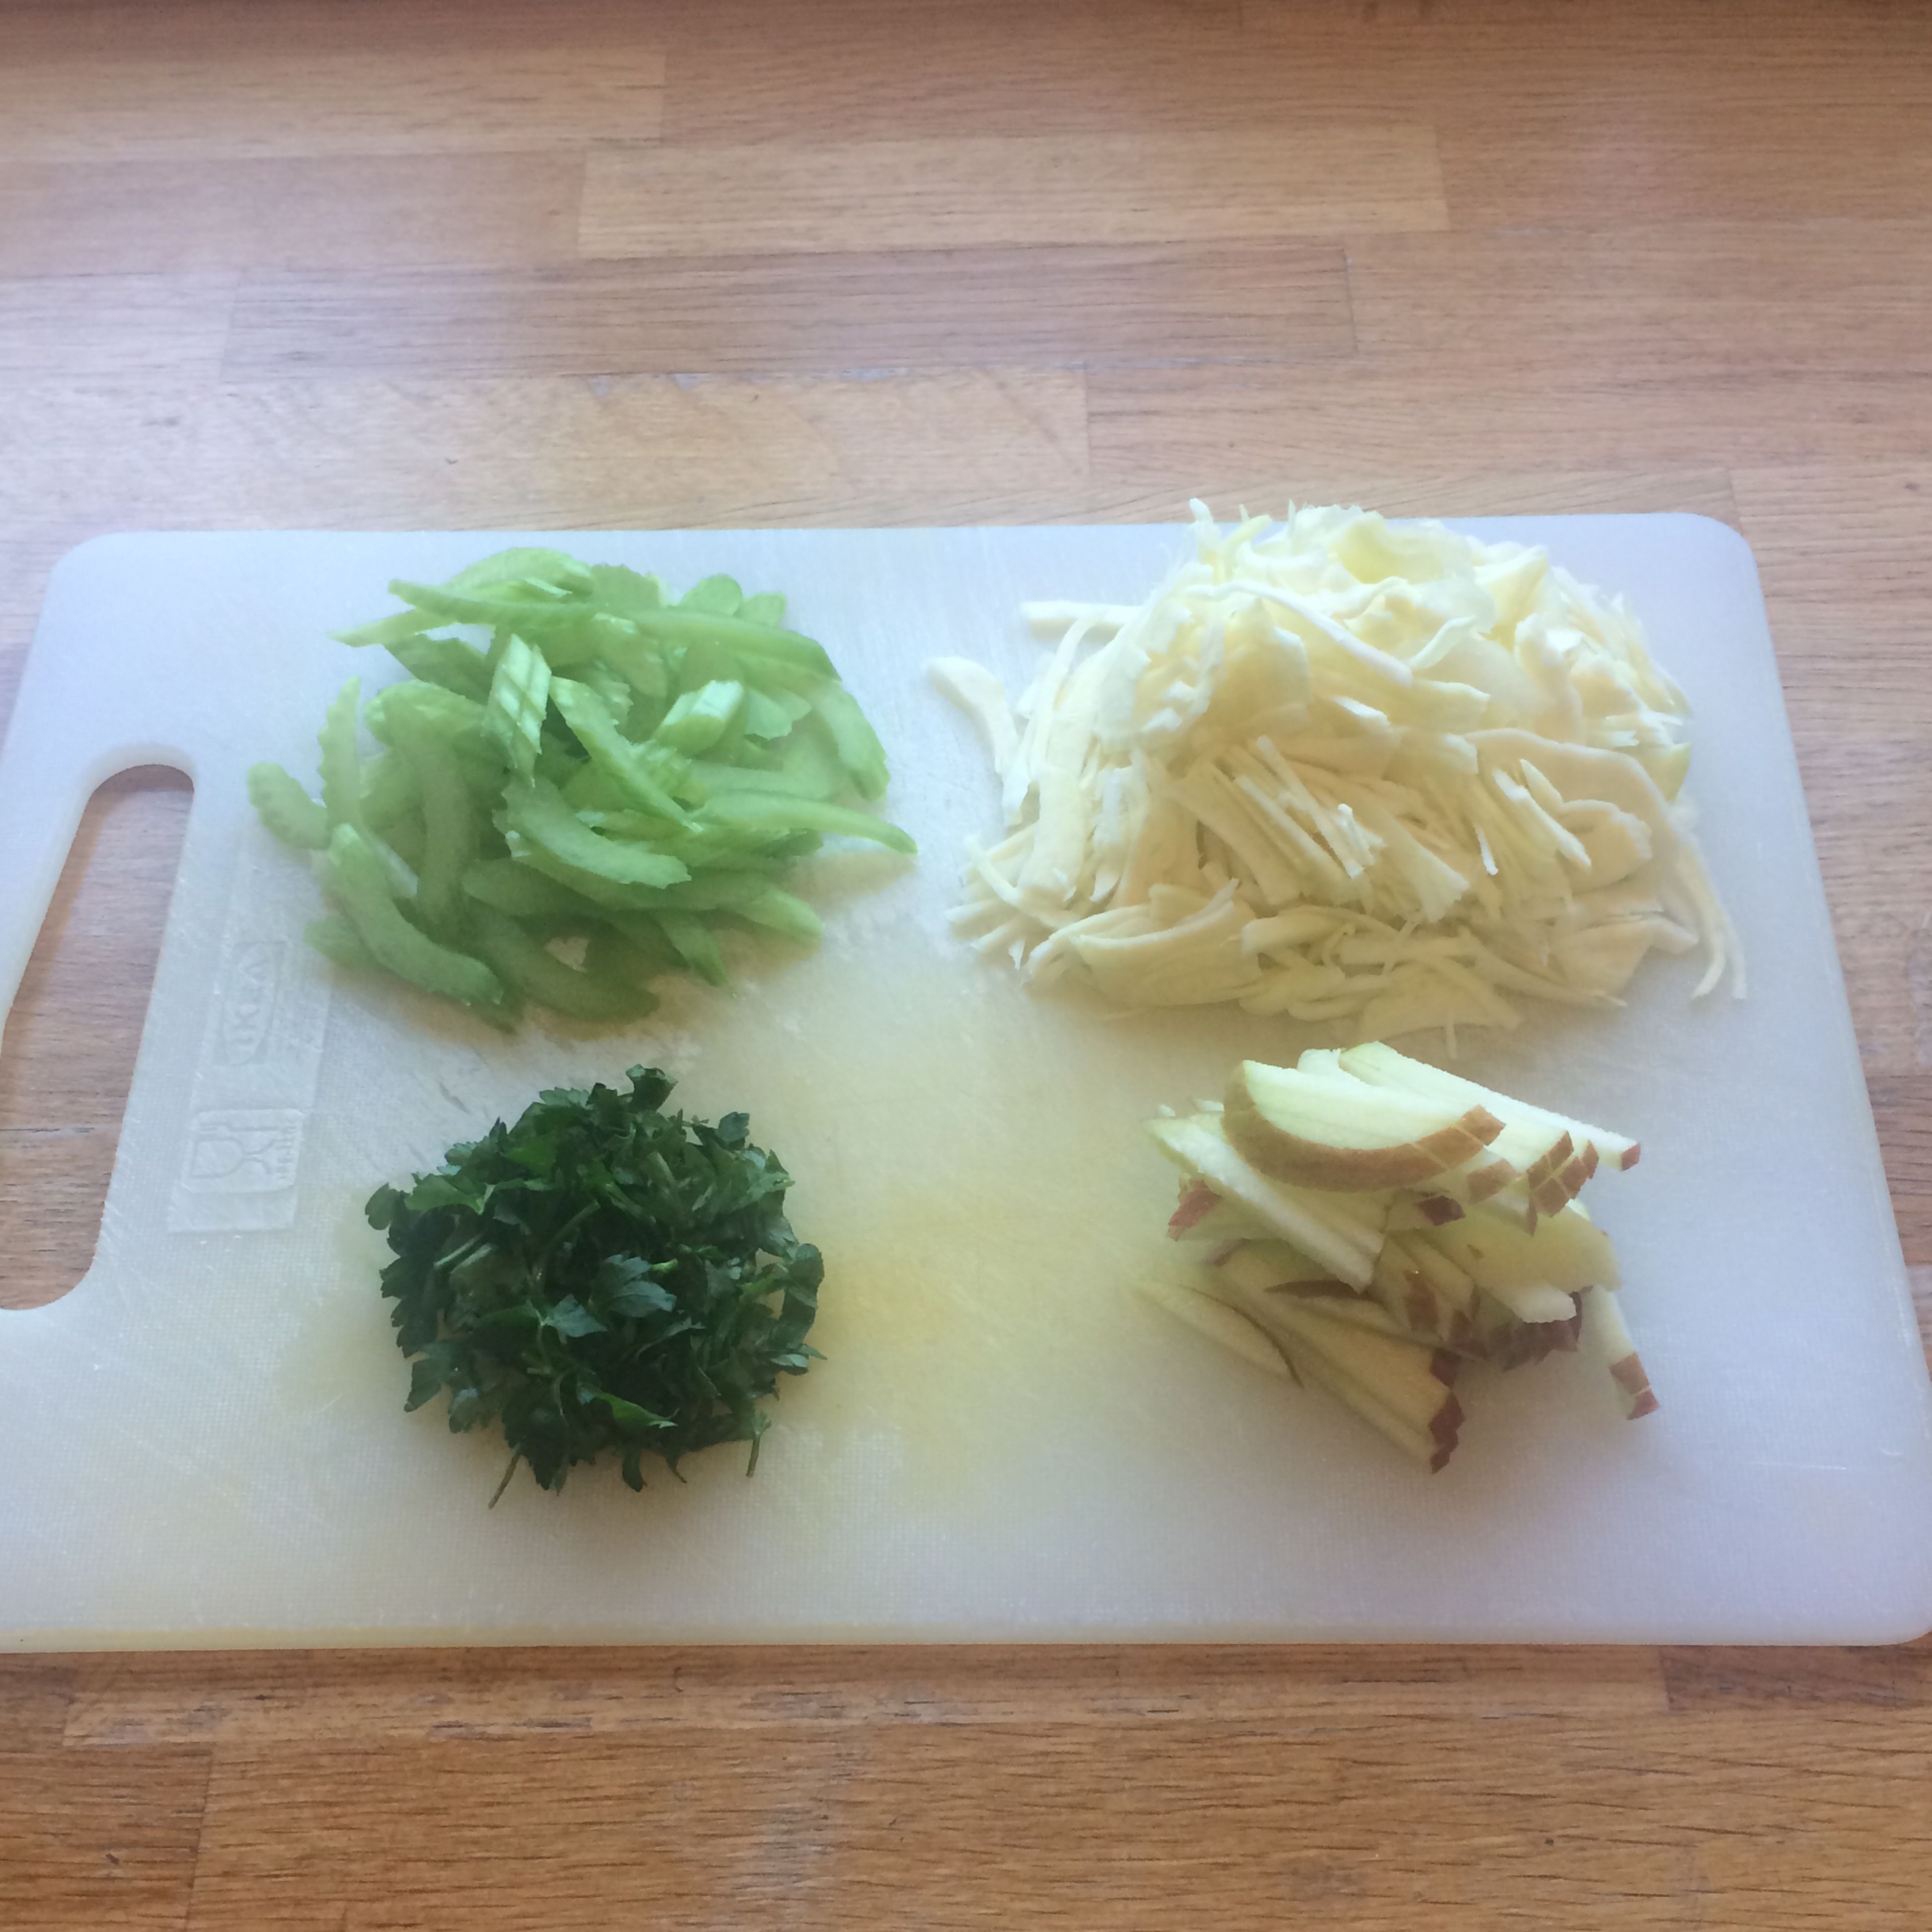 Prepare waldorf slaw by finely chopping cabbage, celery and matchstick the apple